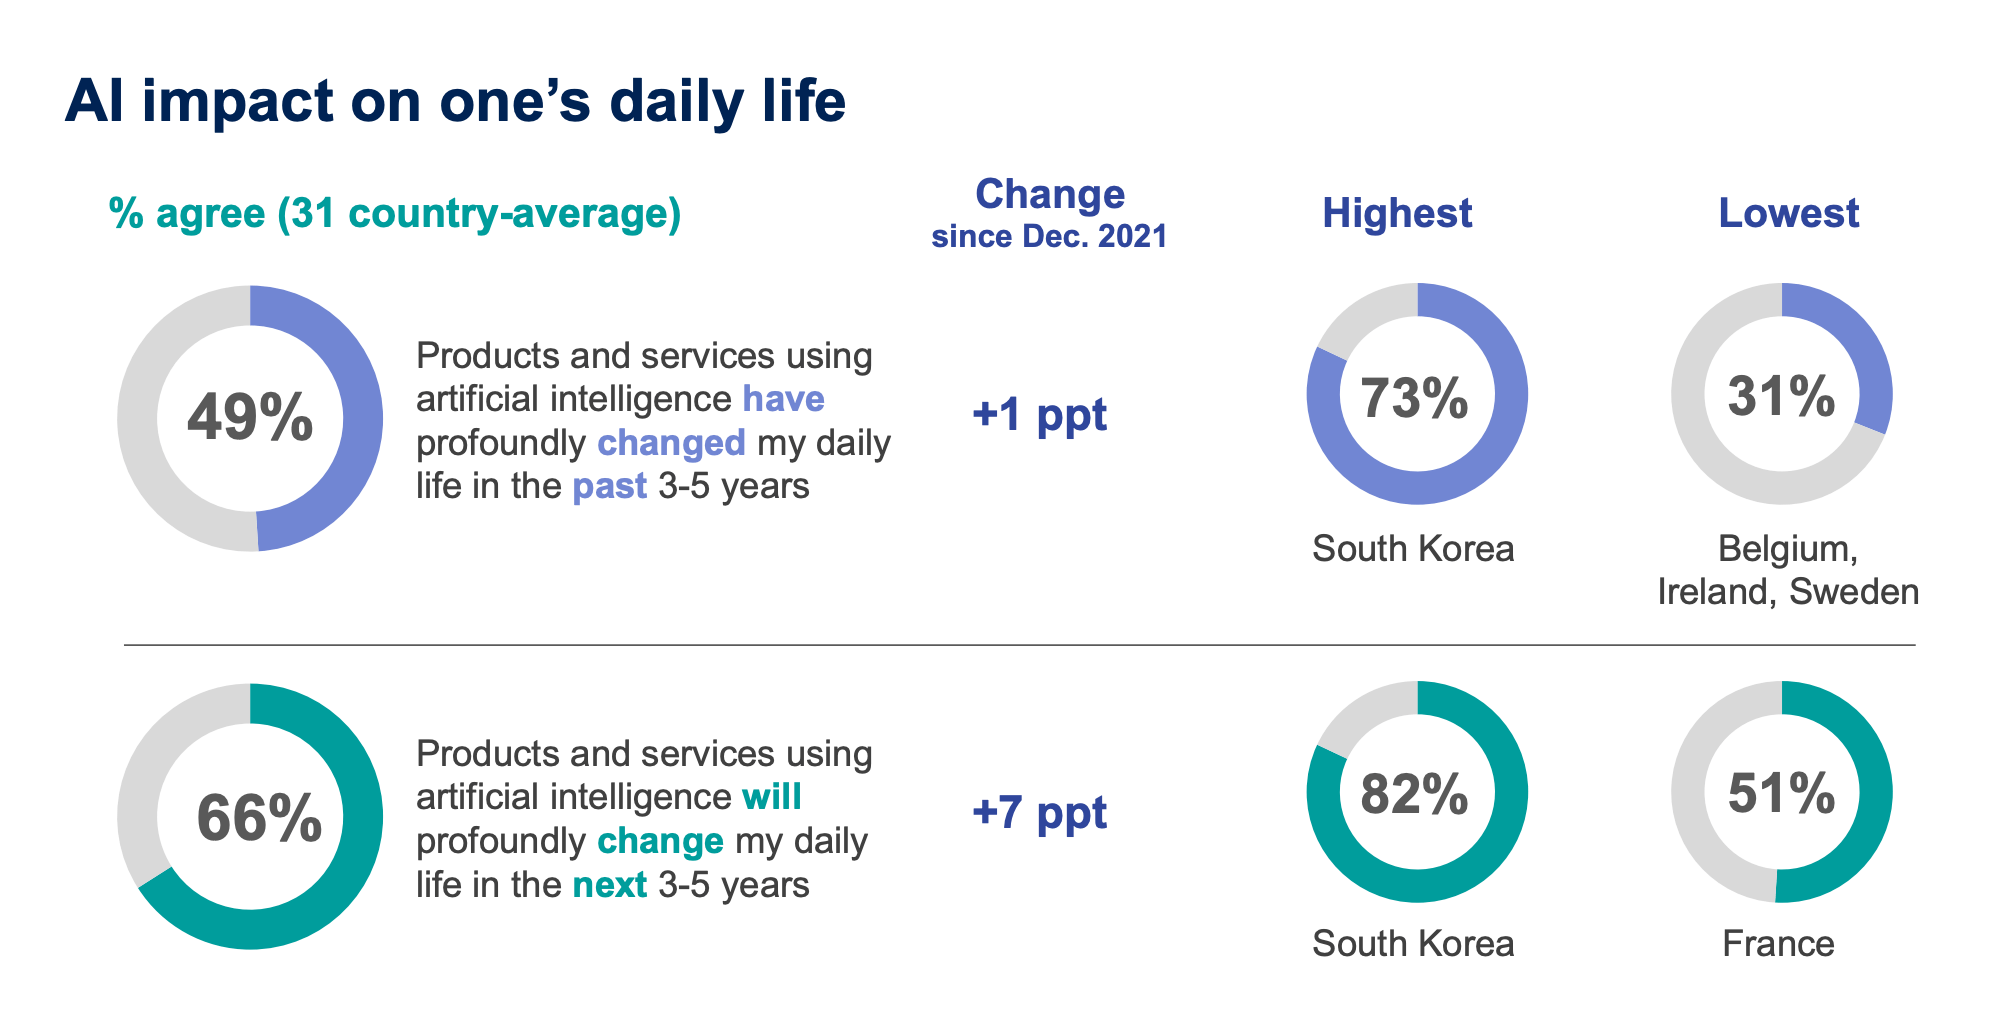 People Perception on AI Daily Impact on Life Change